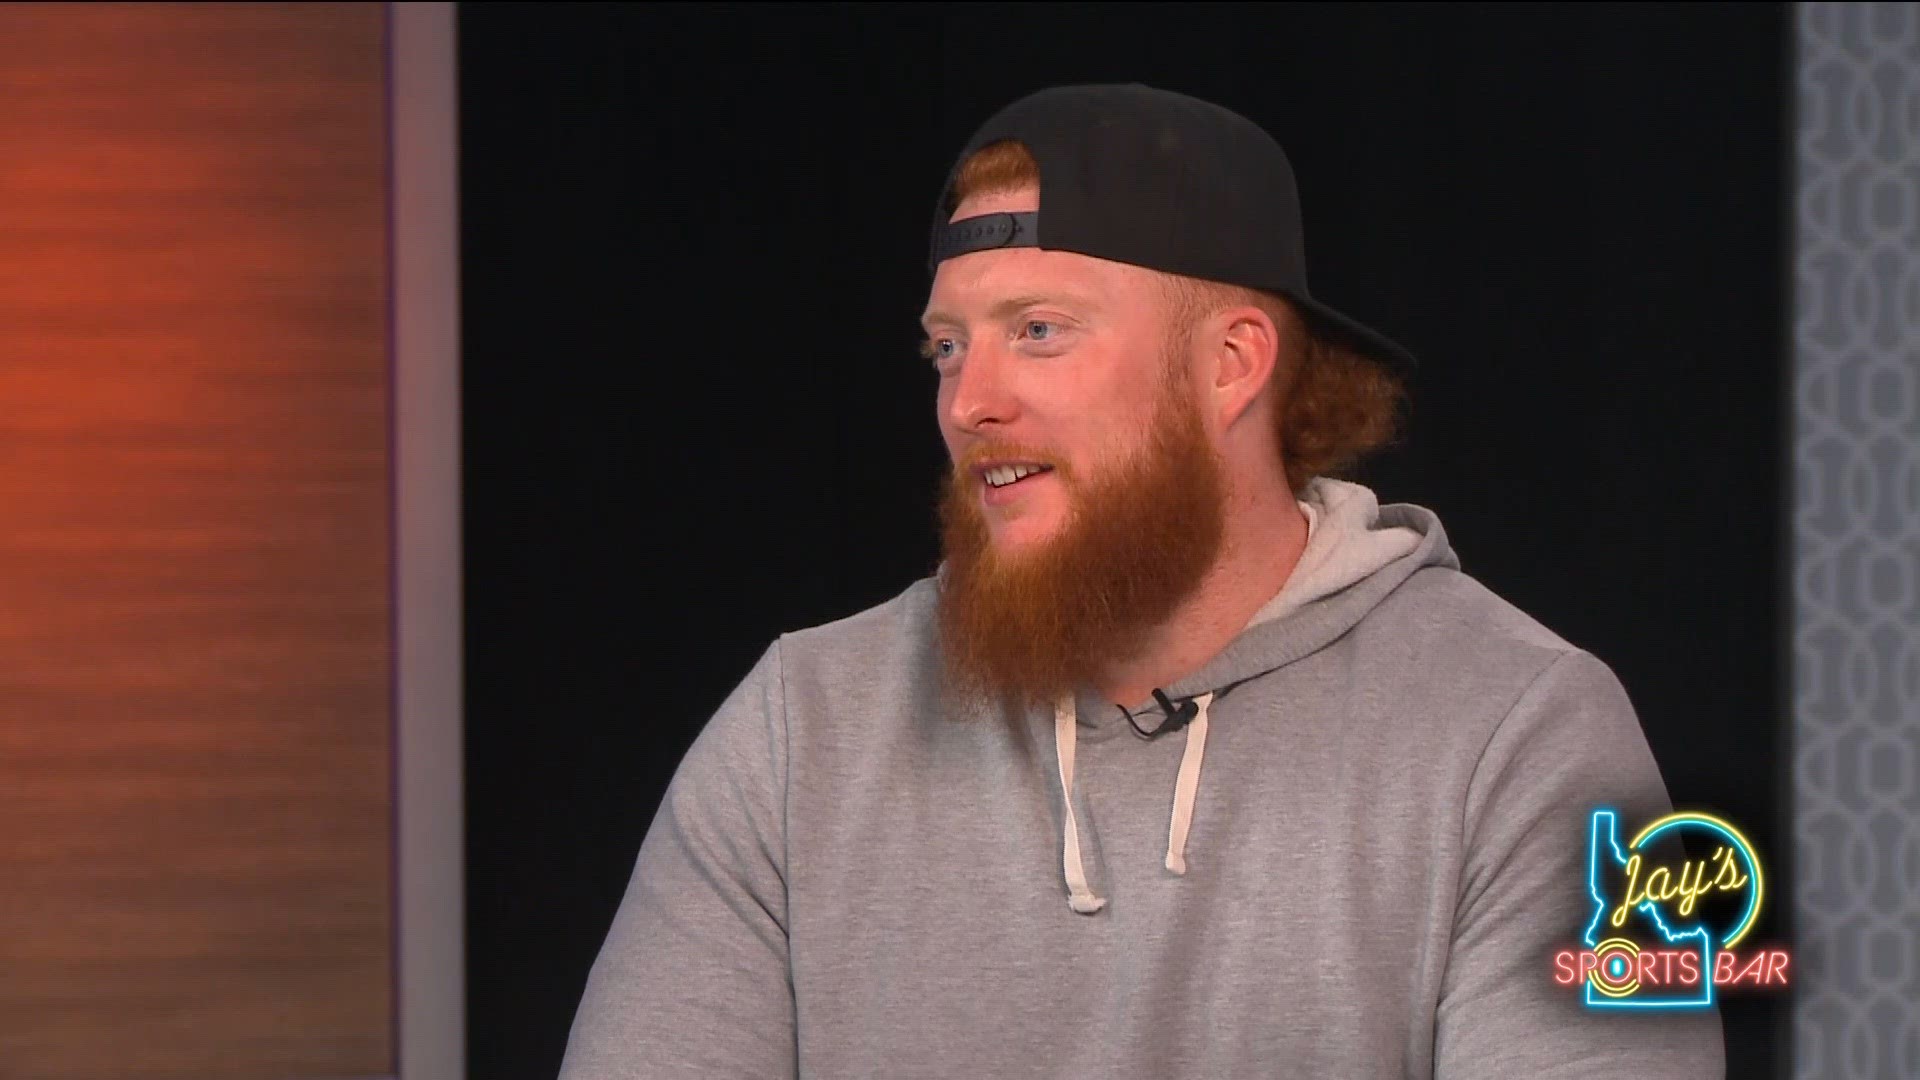 Los Angeles Chargers defensive lineman Scott Matlock joins KTVB's Jay Tust and former Bronco Kekaula Kaniho in studio on a special edition of Jay's Sports Bar.